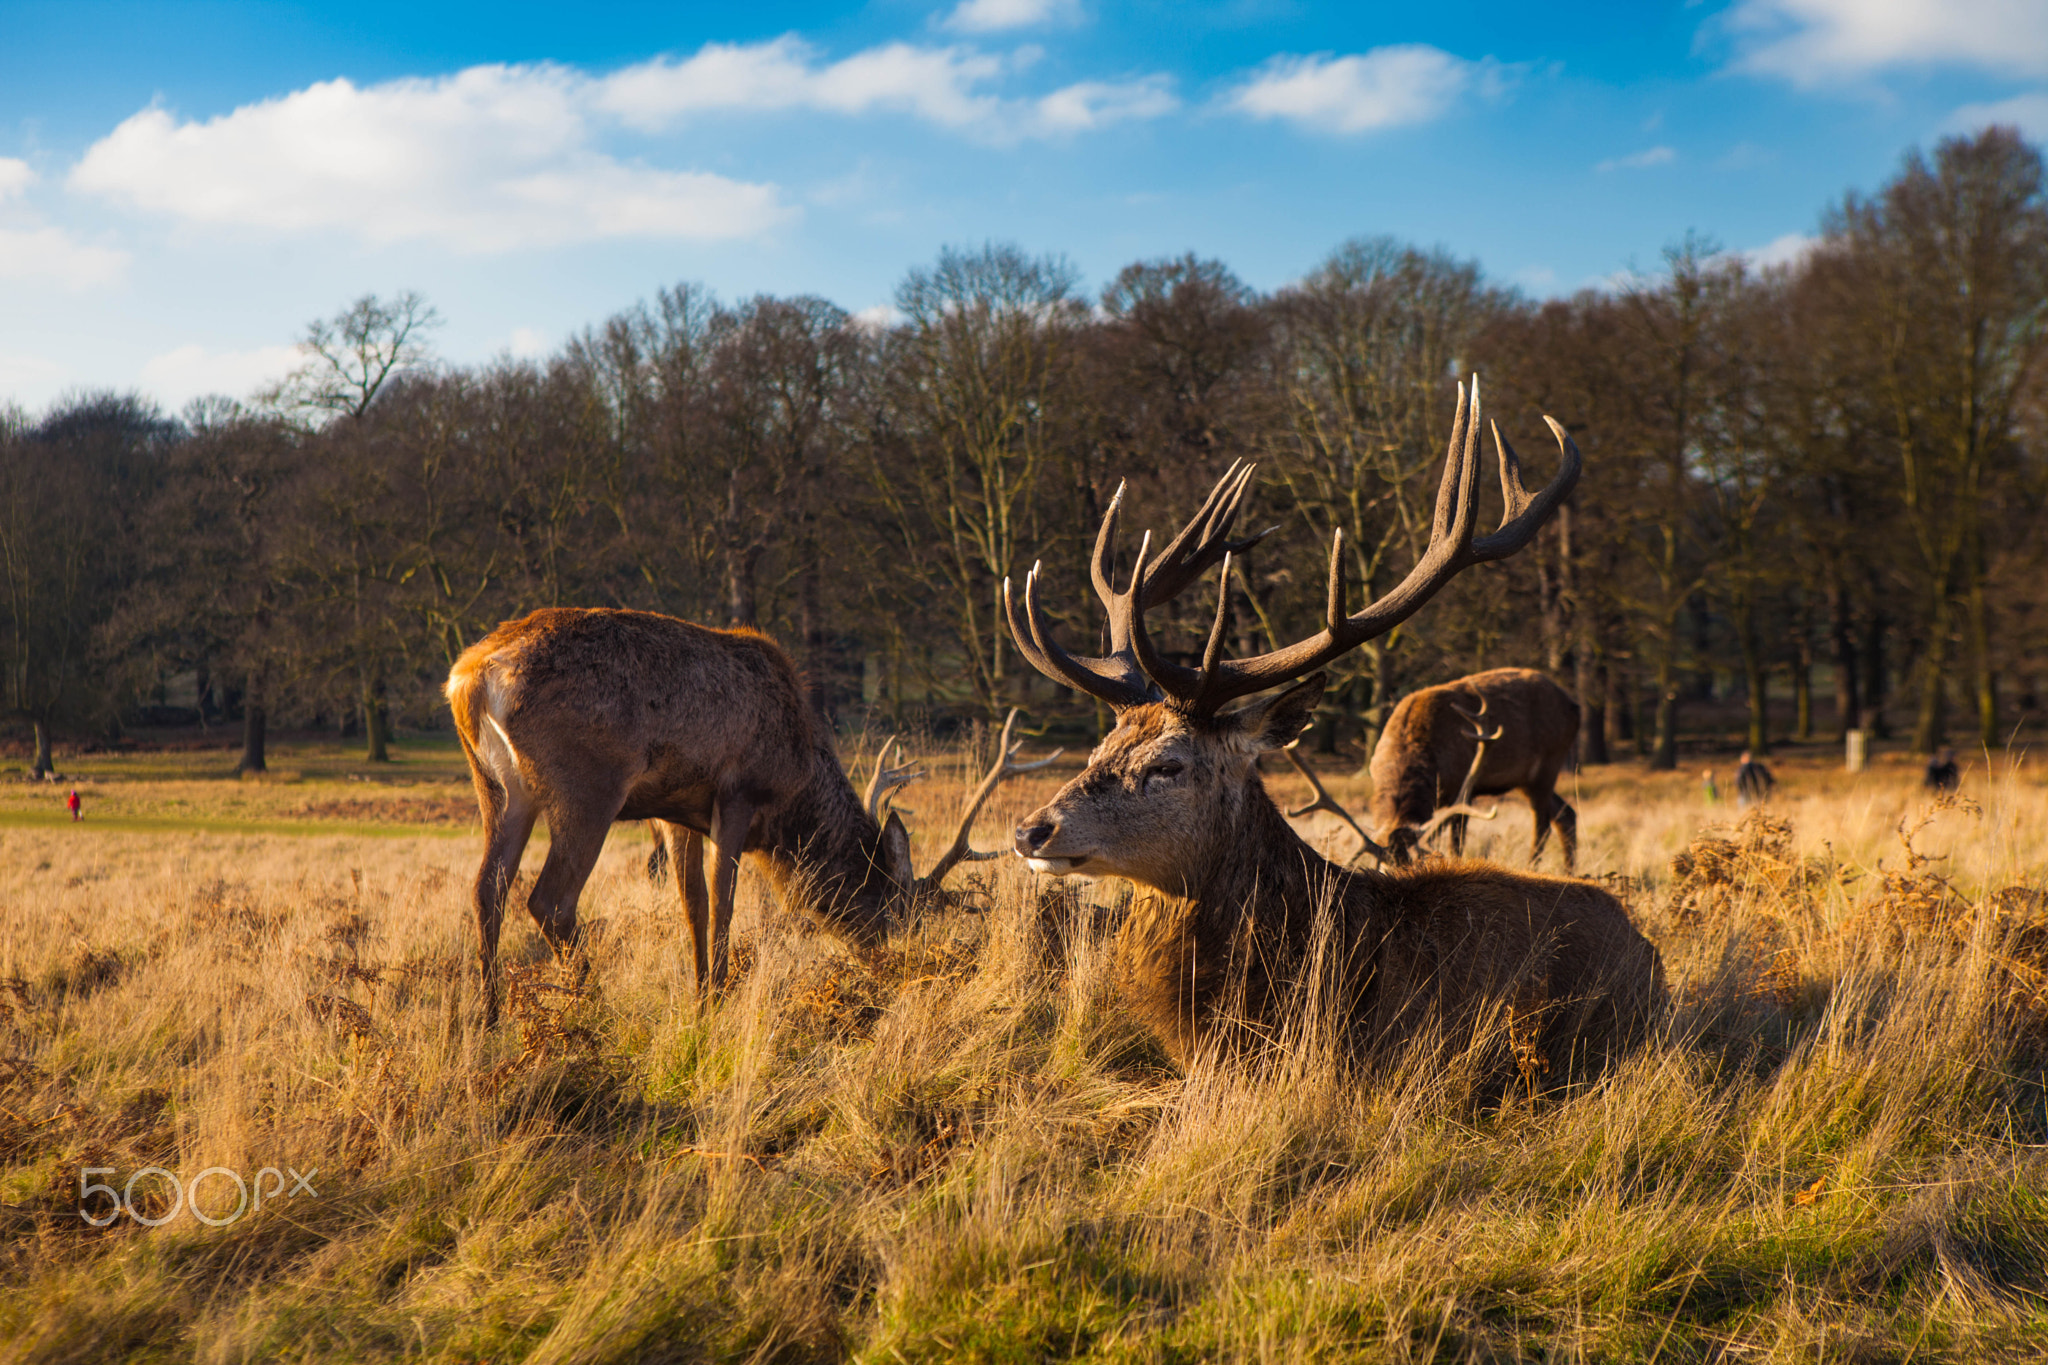 Deers in Richmond Park in the London Borough of Richmond upon Thames